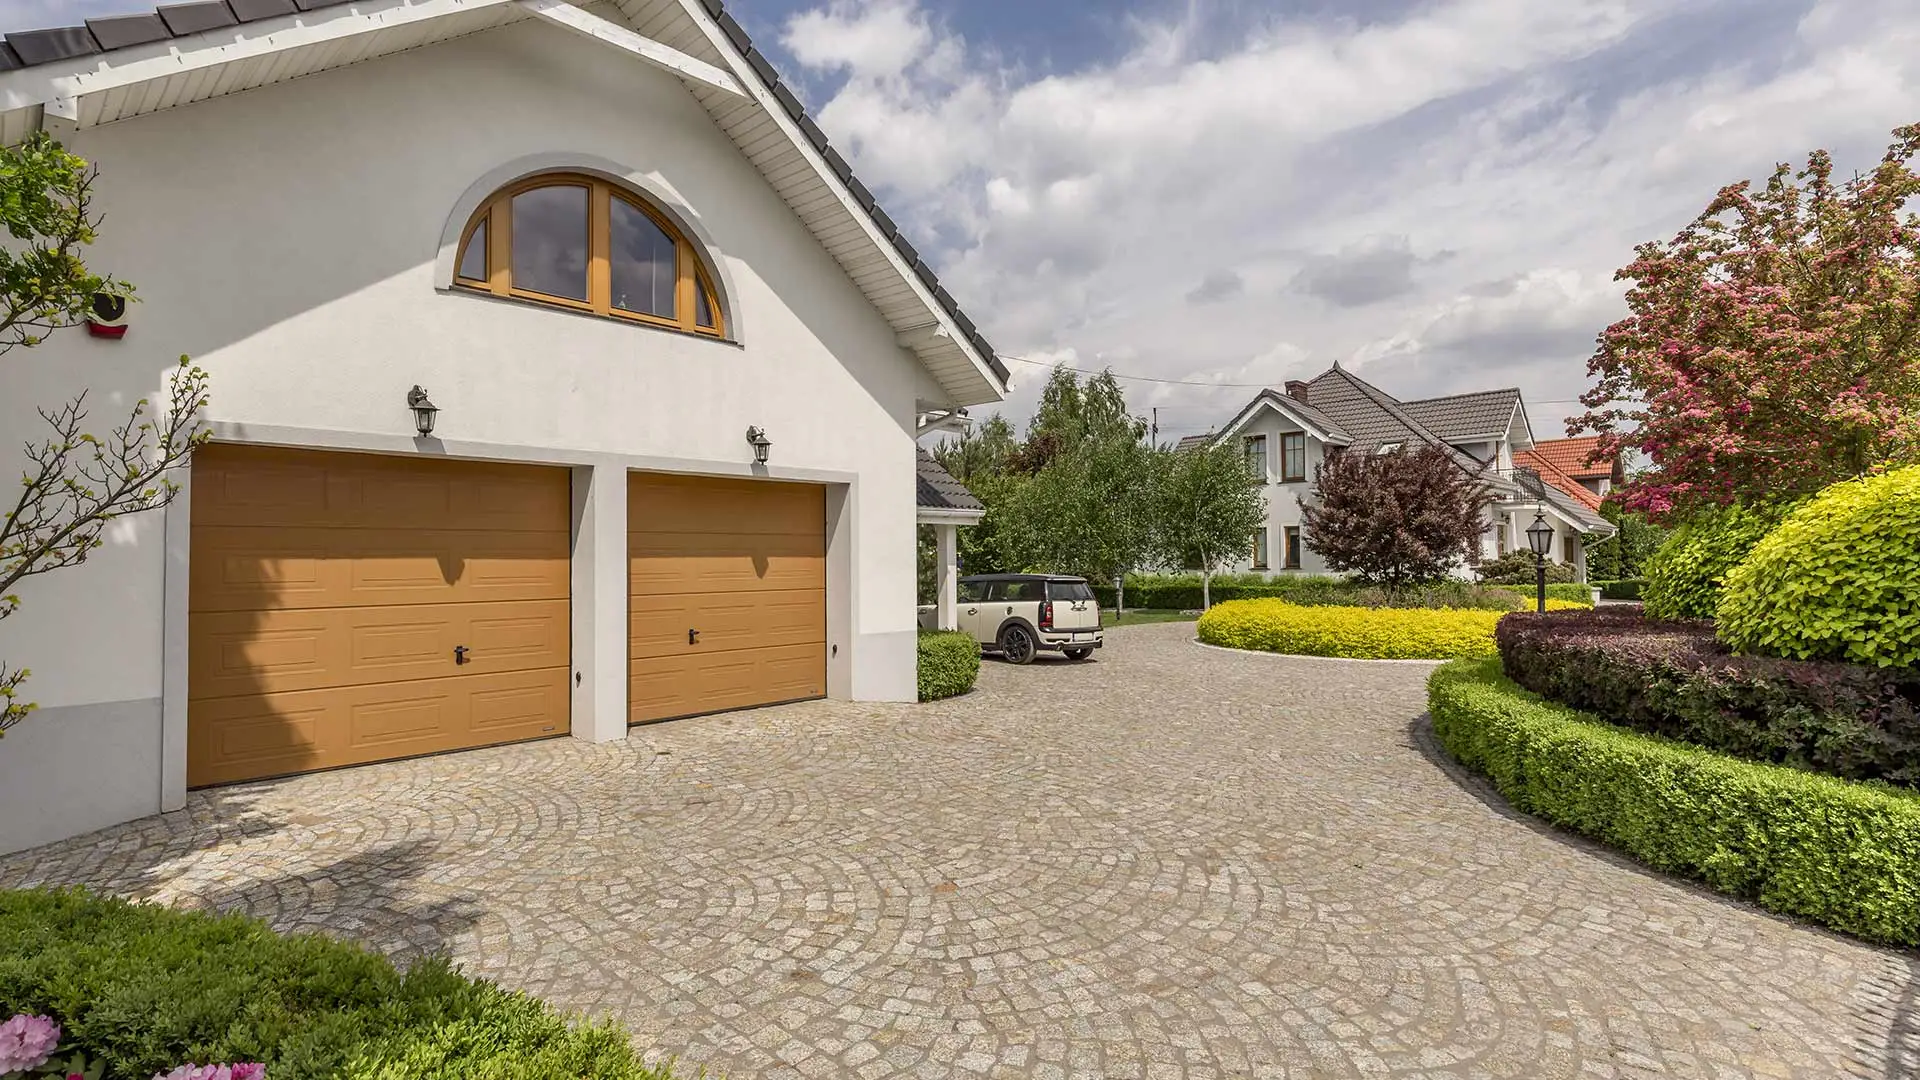 Does Your Driveway Need a Simple Repair or a Full Replacement?